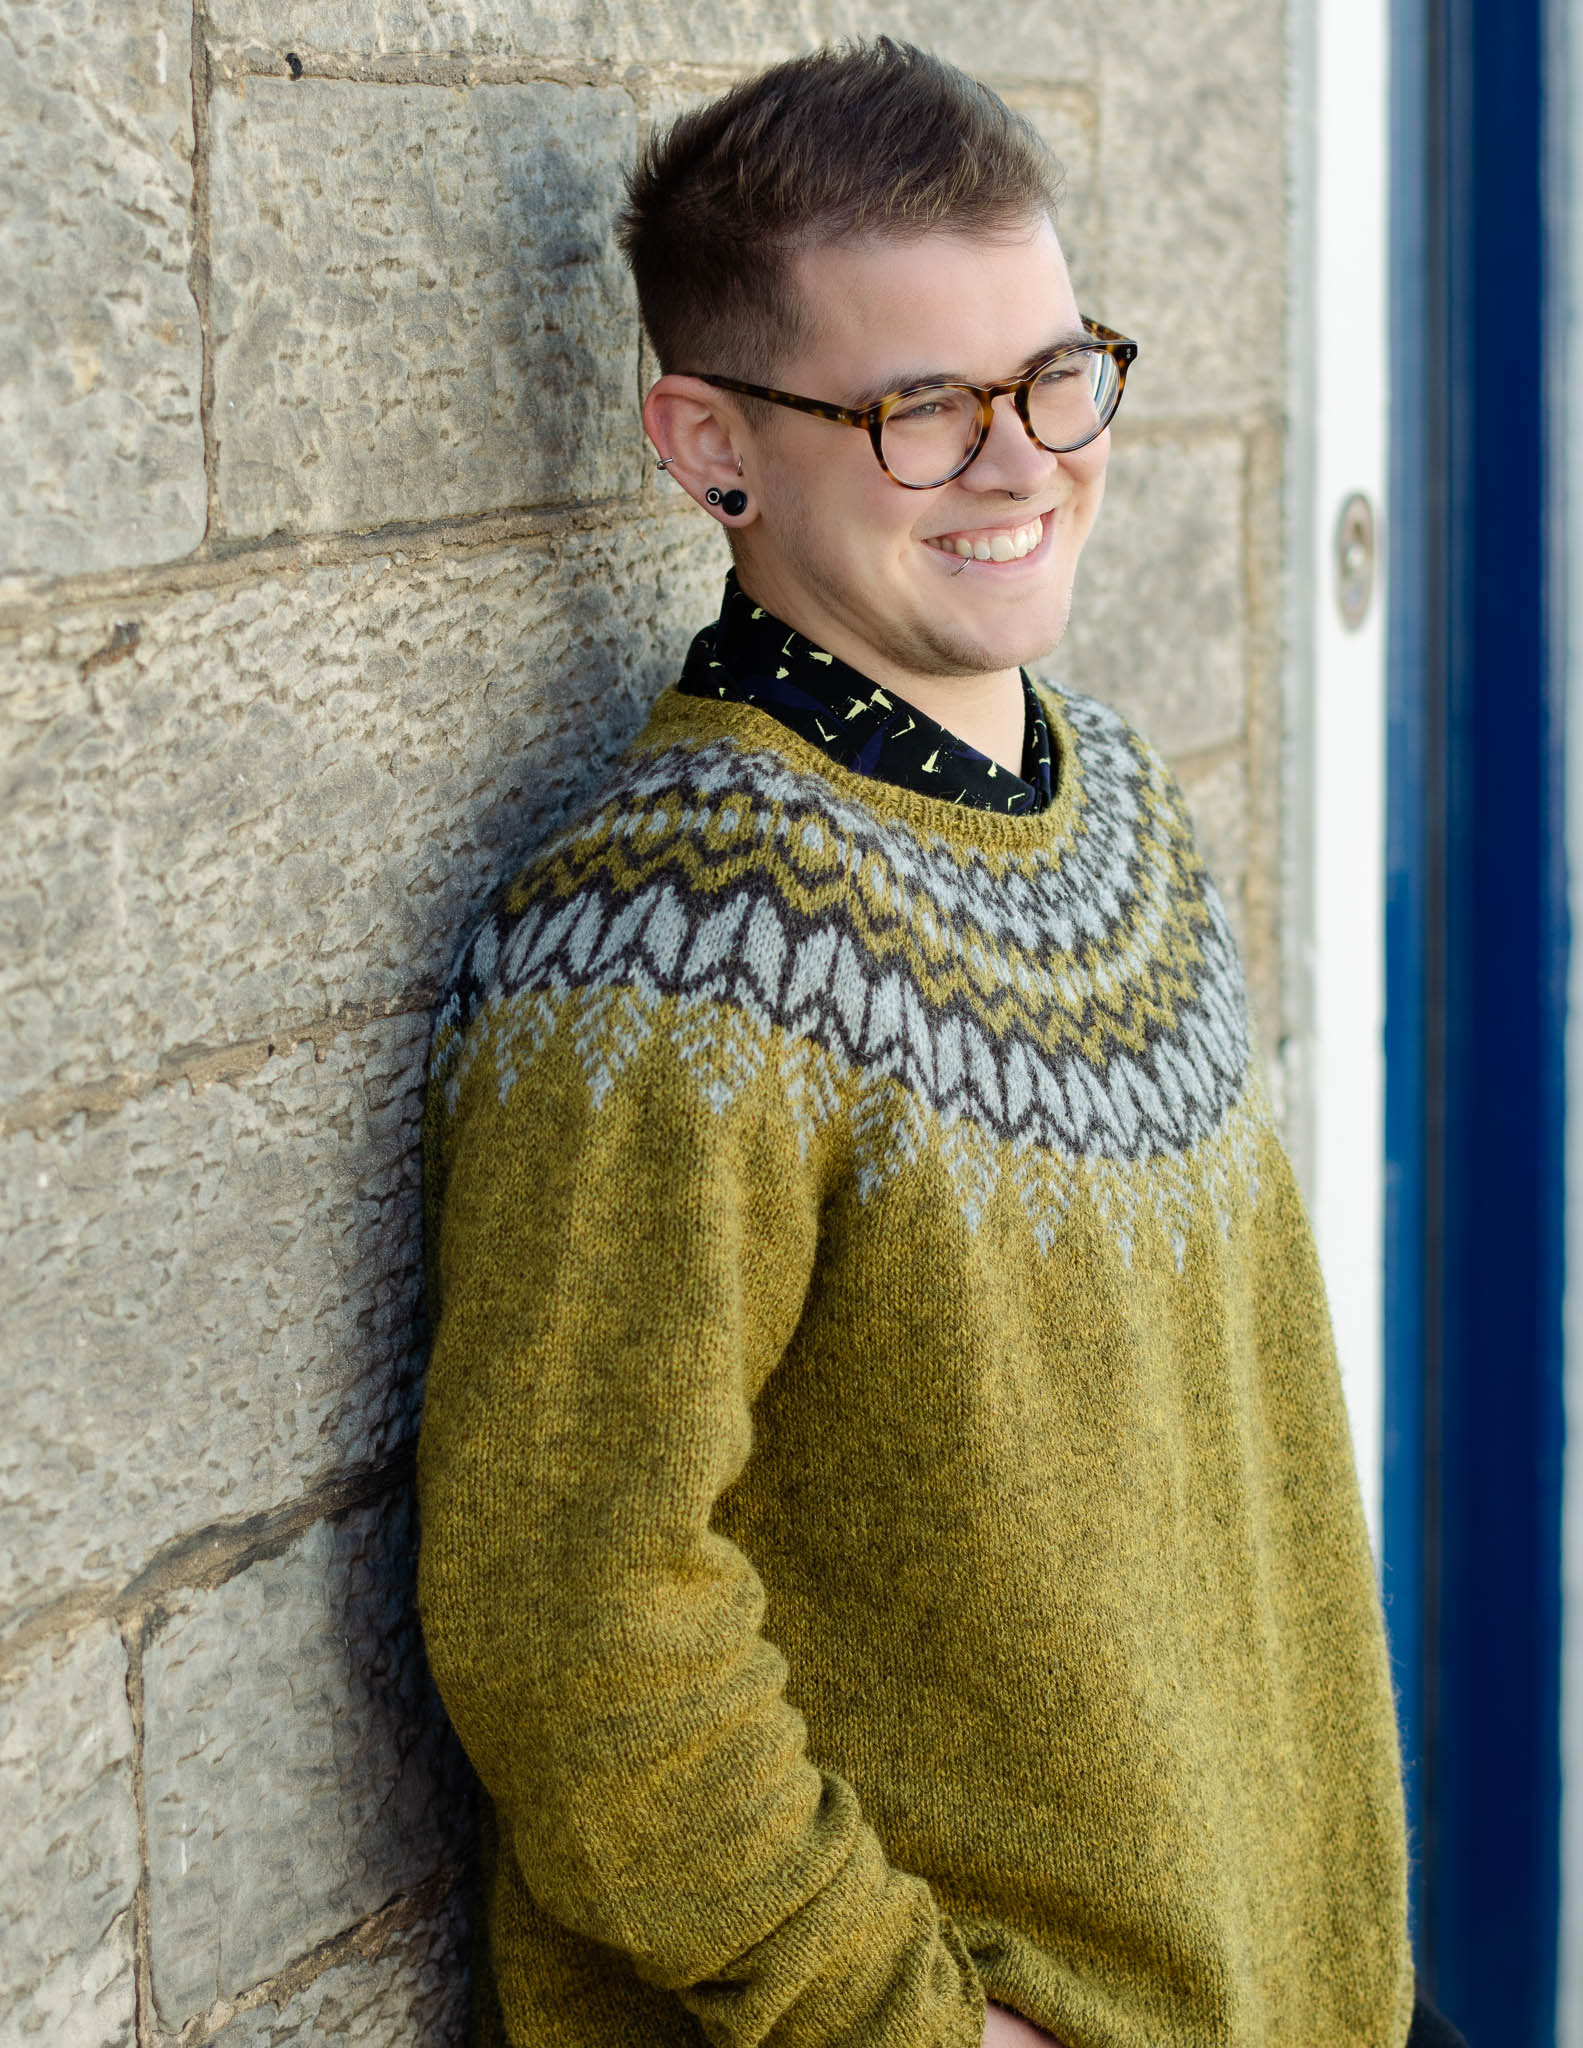 A white man leans casually against a light coloured stone wall, he has short hair, is wearing dark glasses and smiles at the camera. He is wearing an earthy green knit sweater with a dark brown and light grey colourwork yoke and dark trousers.